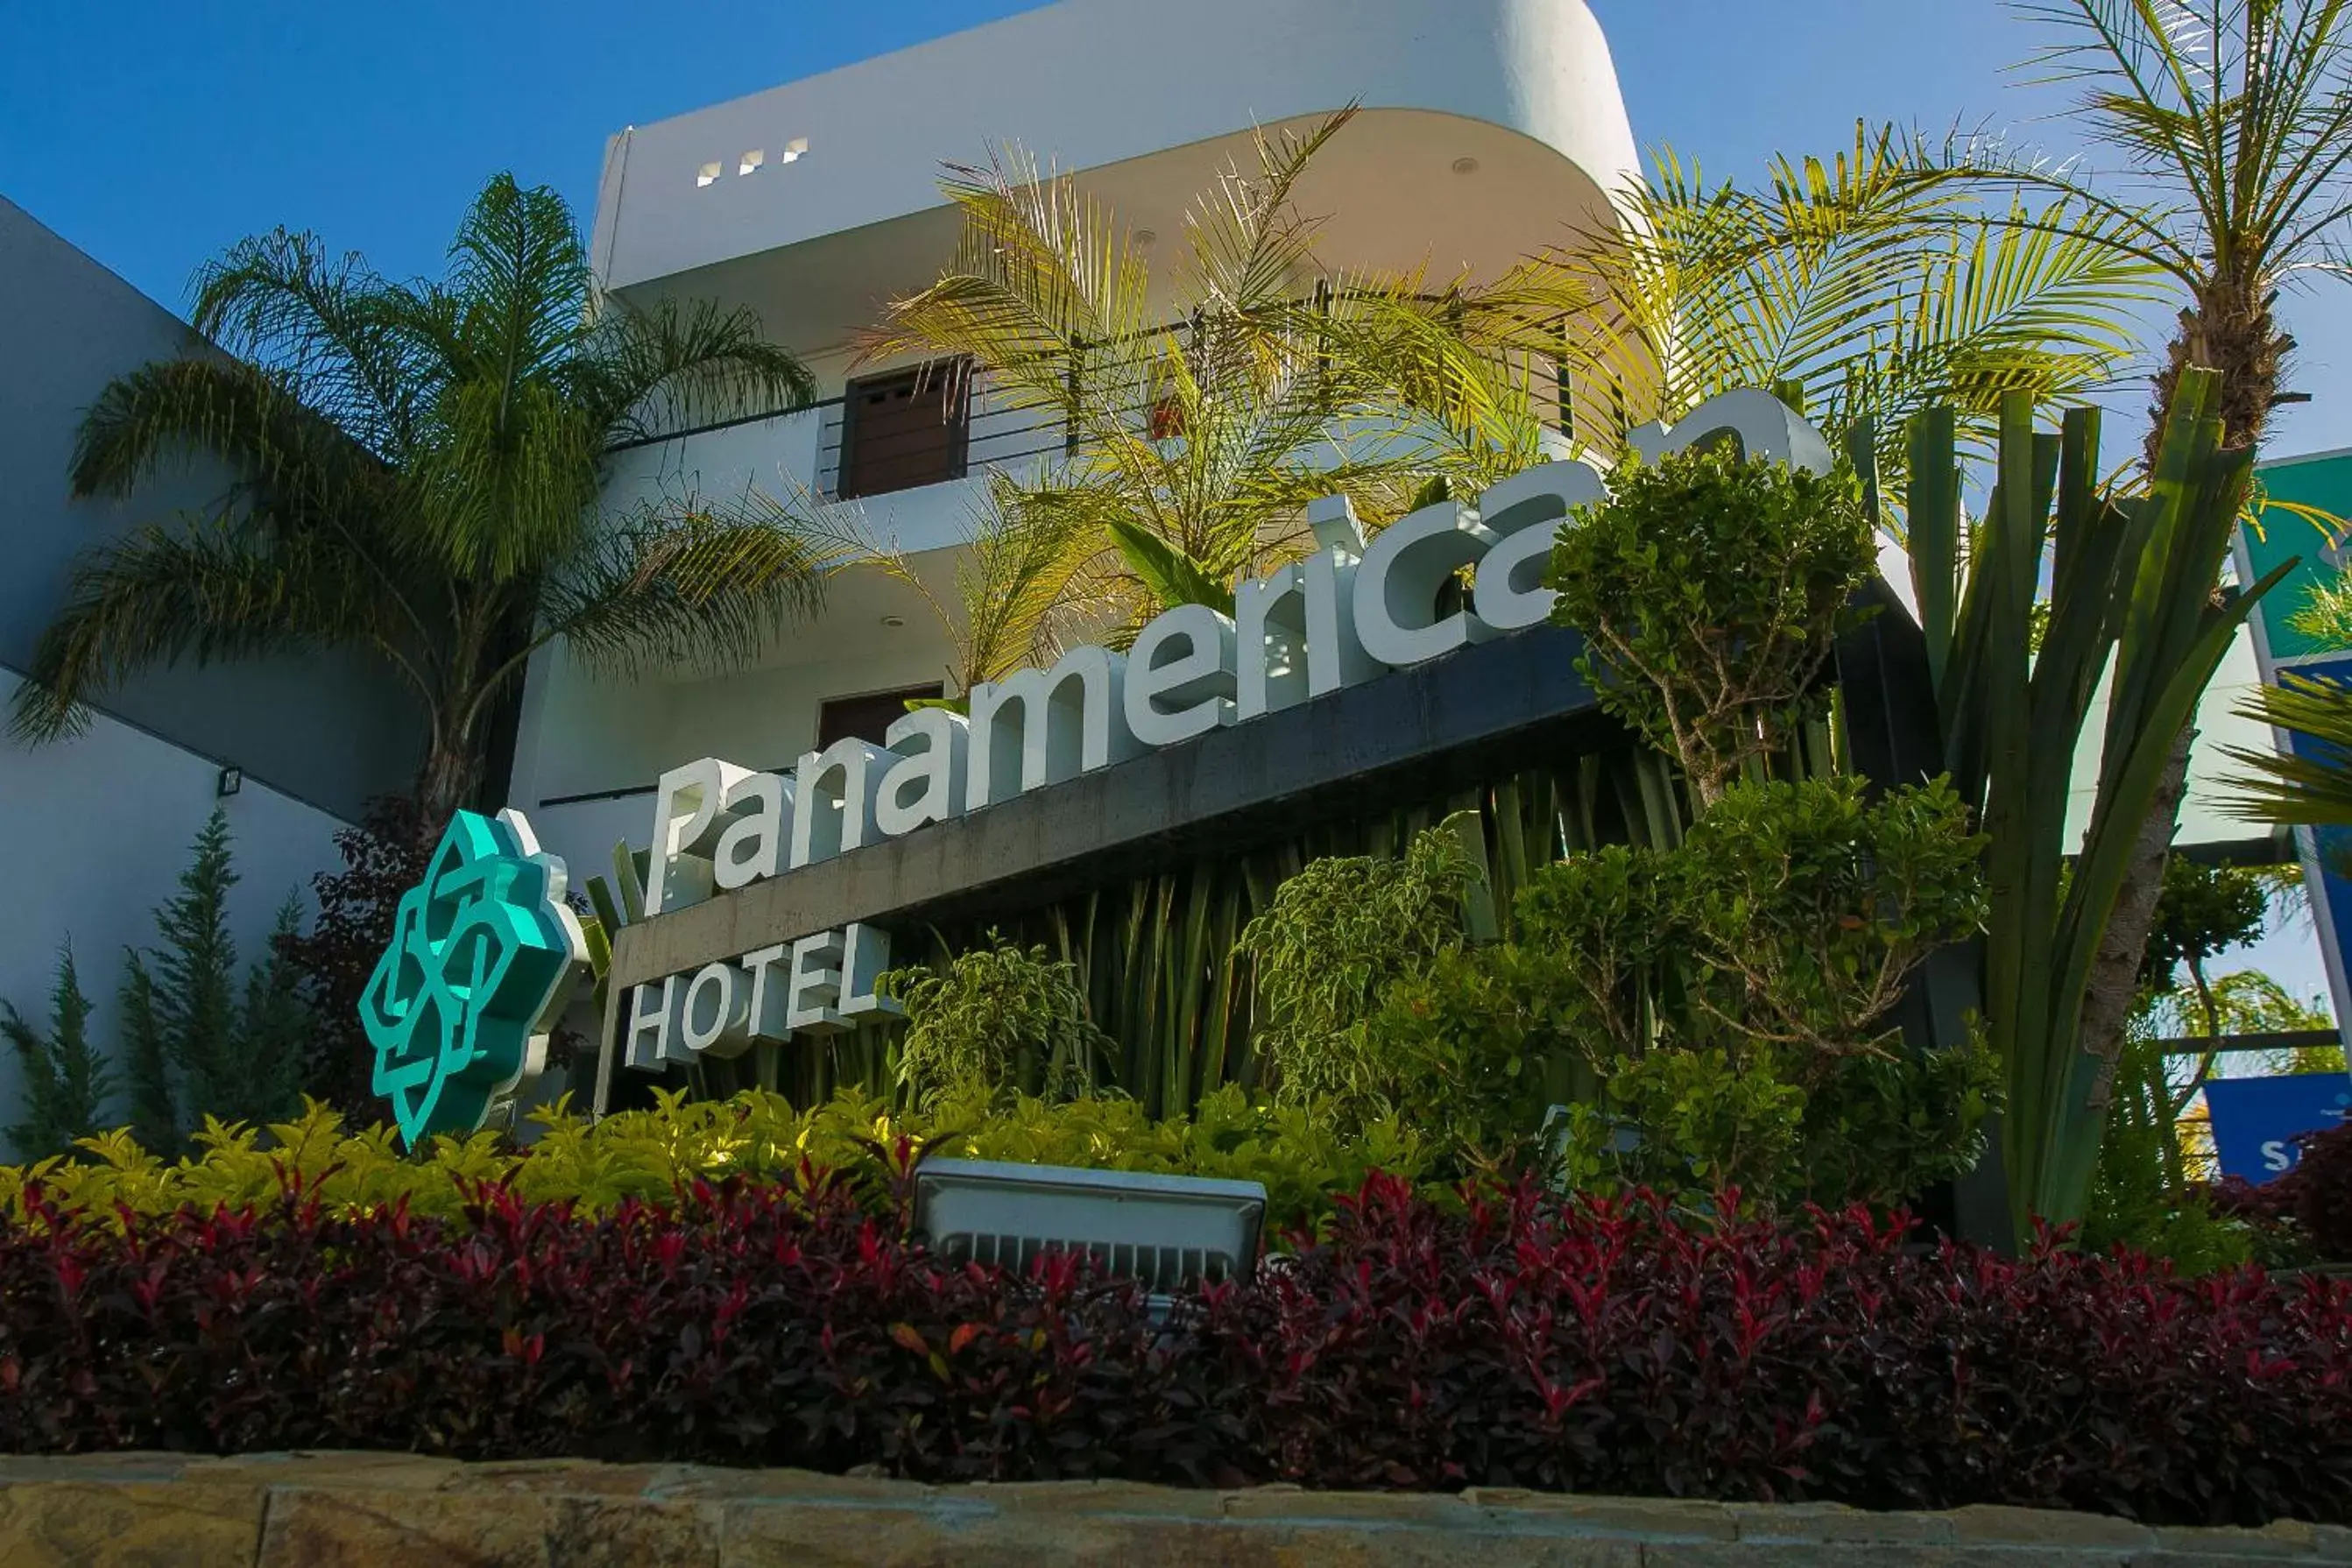 Off site in Hotel Panamerican